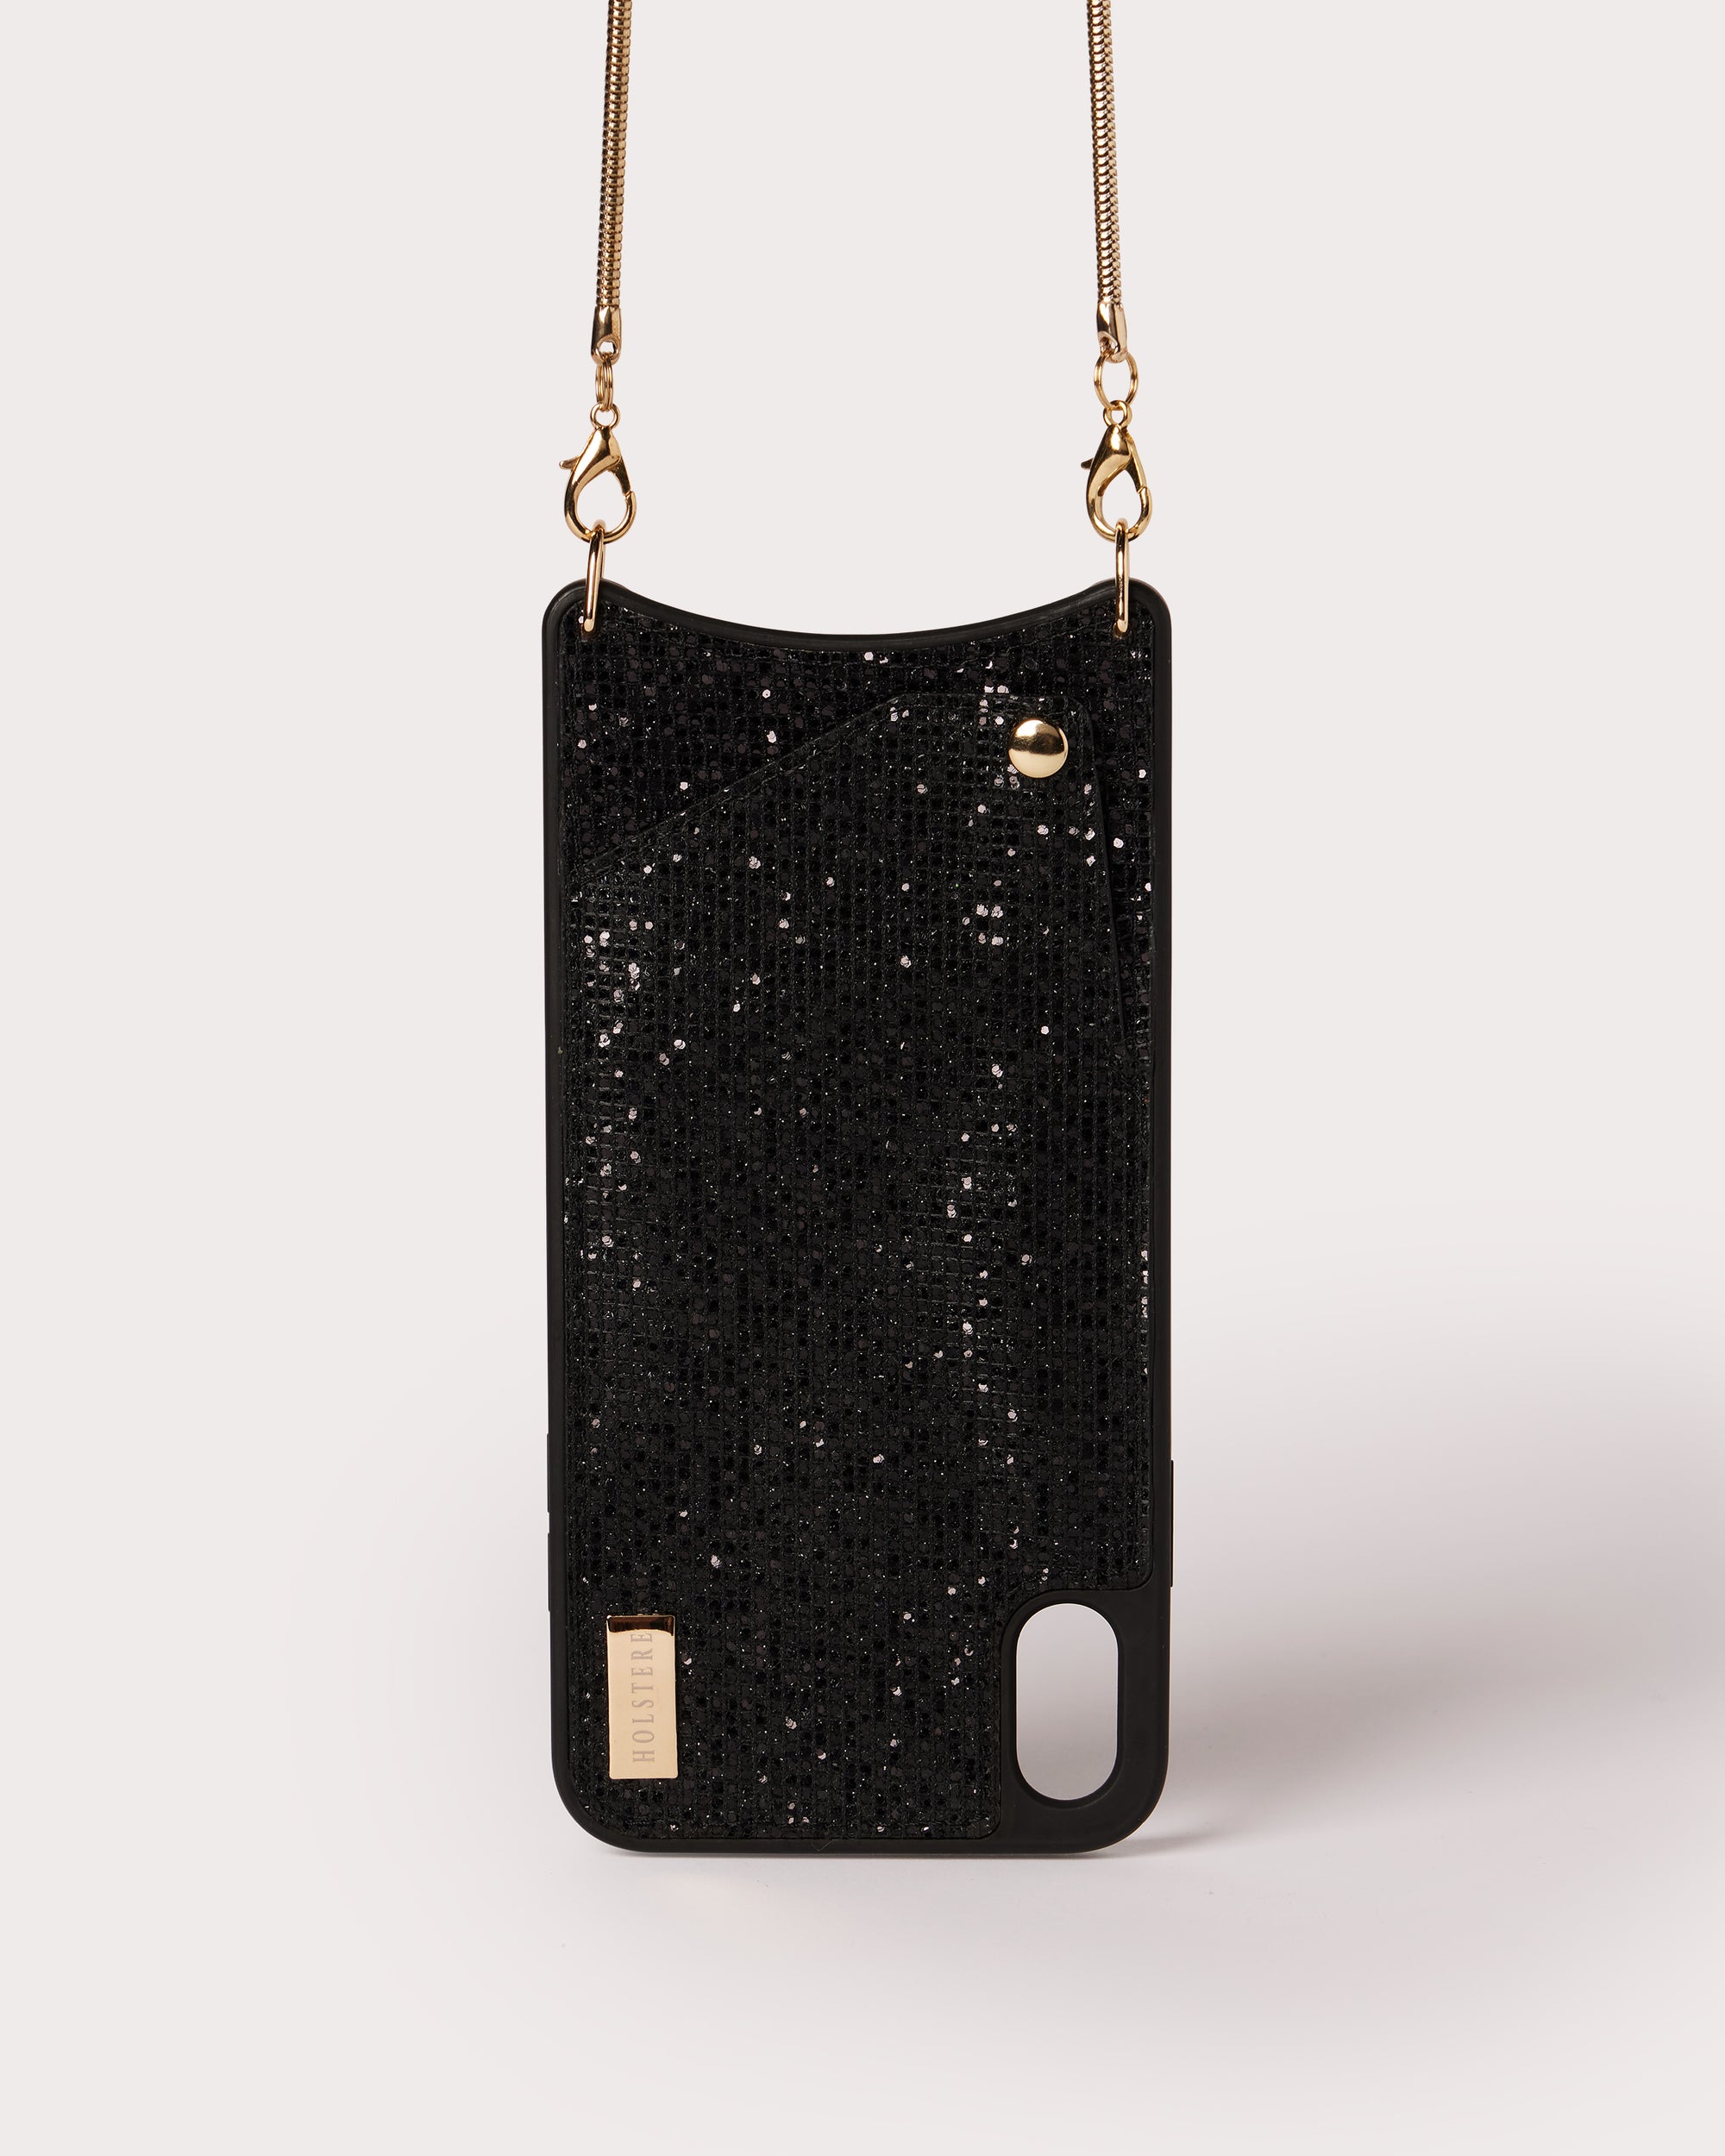 Holstere iPhone Case Crossbody Phone Purse Cross Body Holster Clip for Easy Carry Hands Free - Snap In Phone Case with Wallet Credit Card ID Sleeve and Snap Shut Button, Shoulder Strap - Glimmer Shiny Sparkly Black with Thin Lightweight Gold Toned Chain with Gold Clasp. iPhone Leash for iPhone 6, 6s, SE, 7, 8, 6 Plus, 7 Plus, 8 Plus, X, 10, XS, XR, XS Max